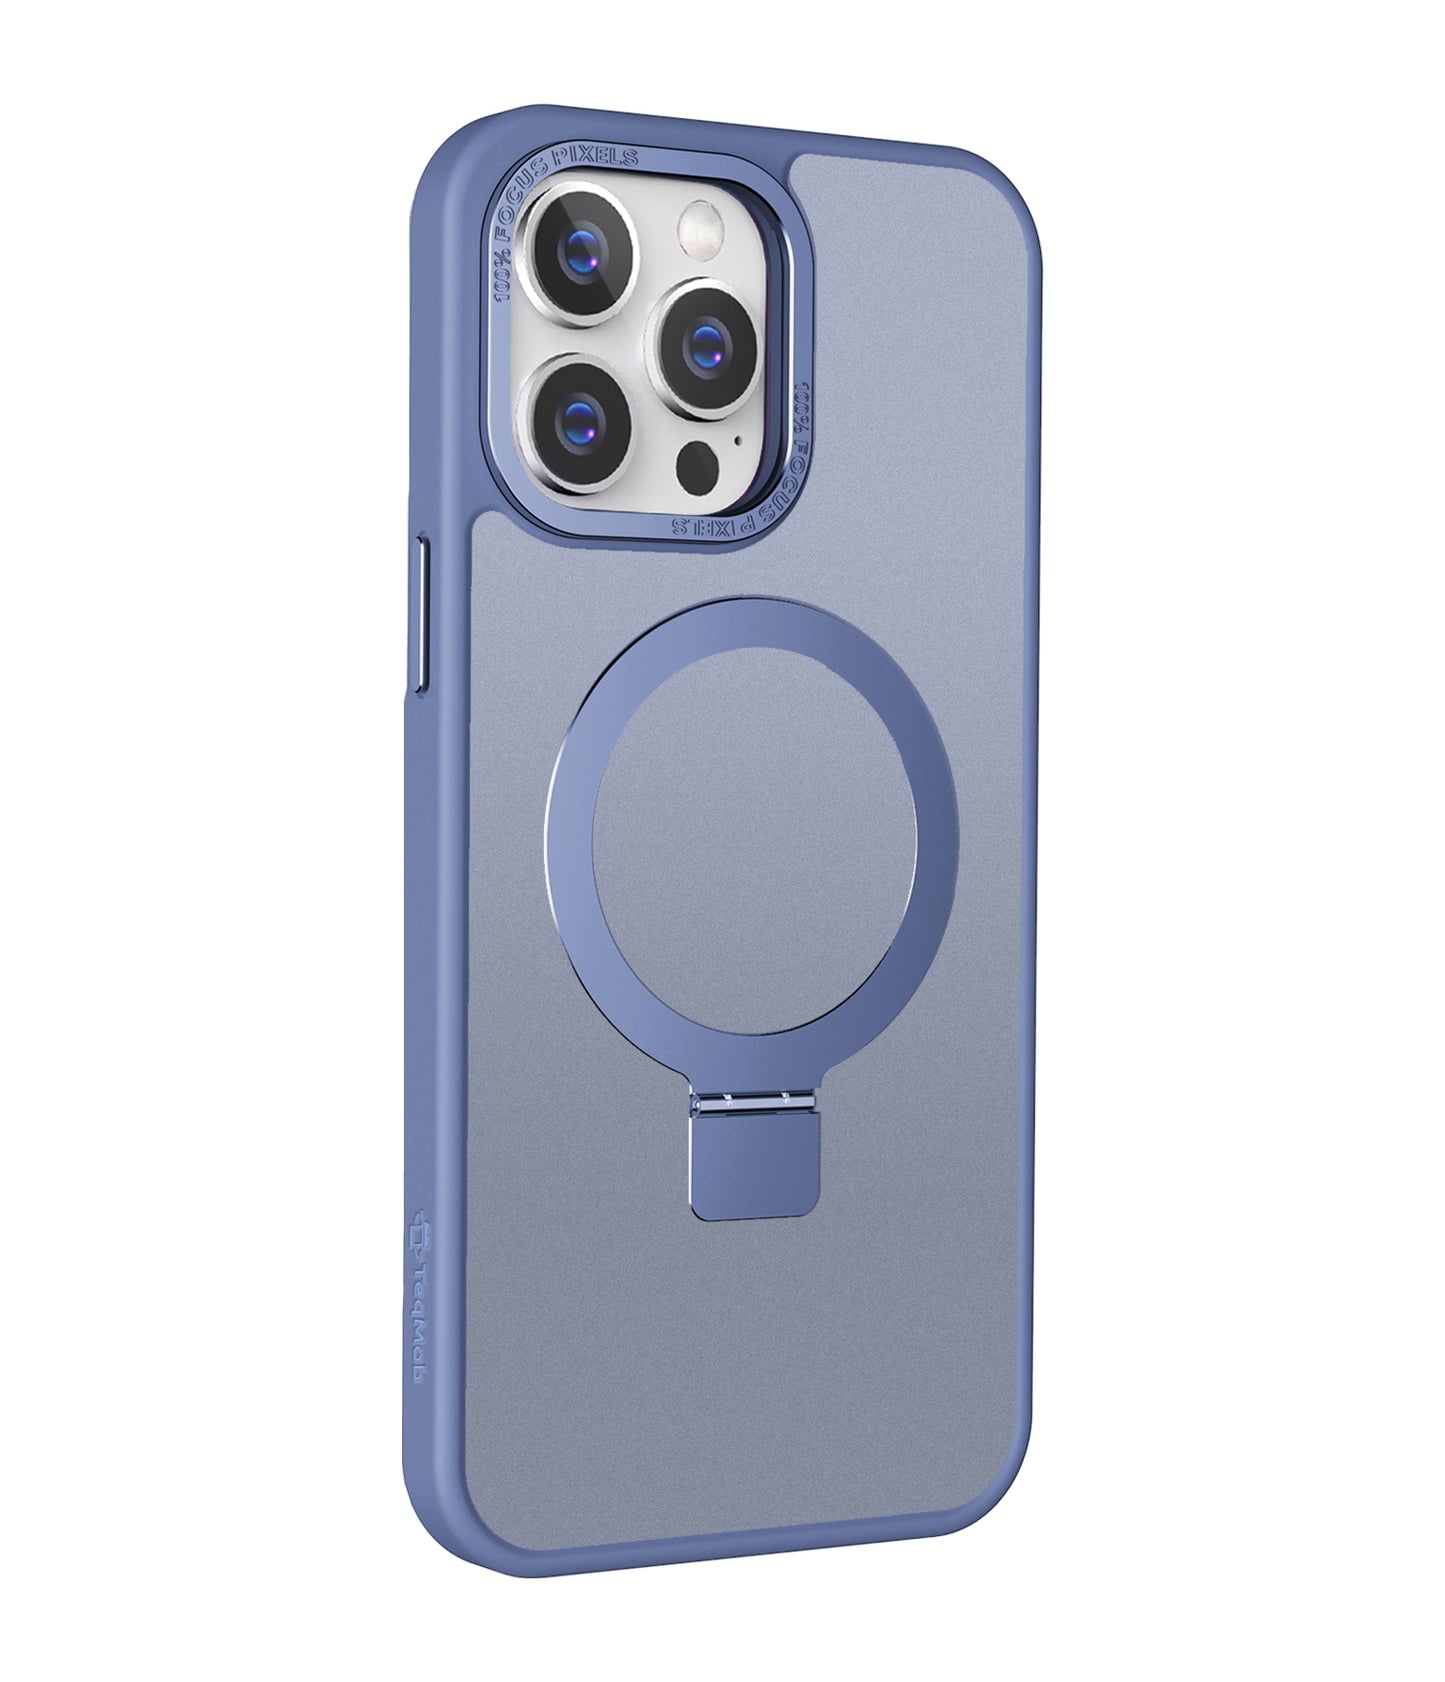 Blue Ringkick Frosted Case for iPhone 12 Pro Max